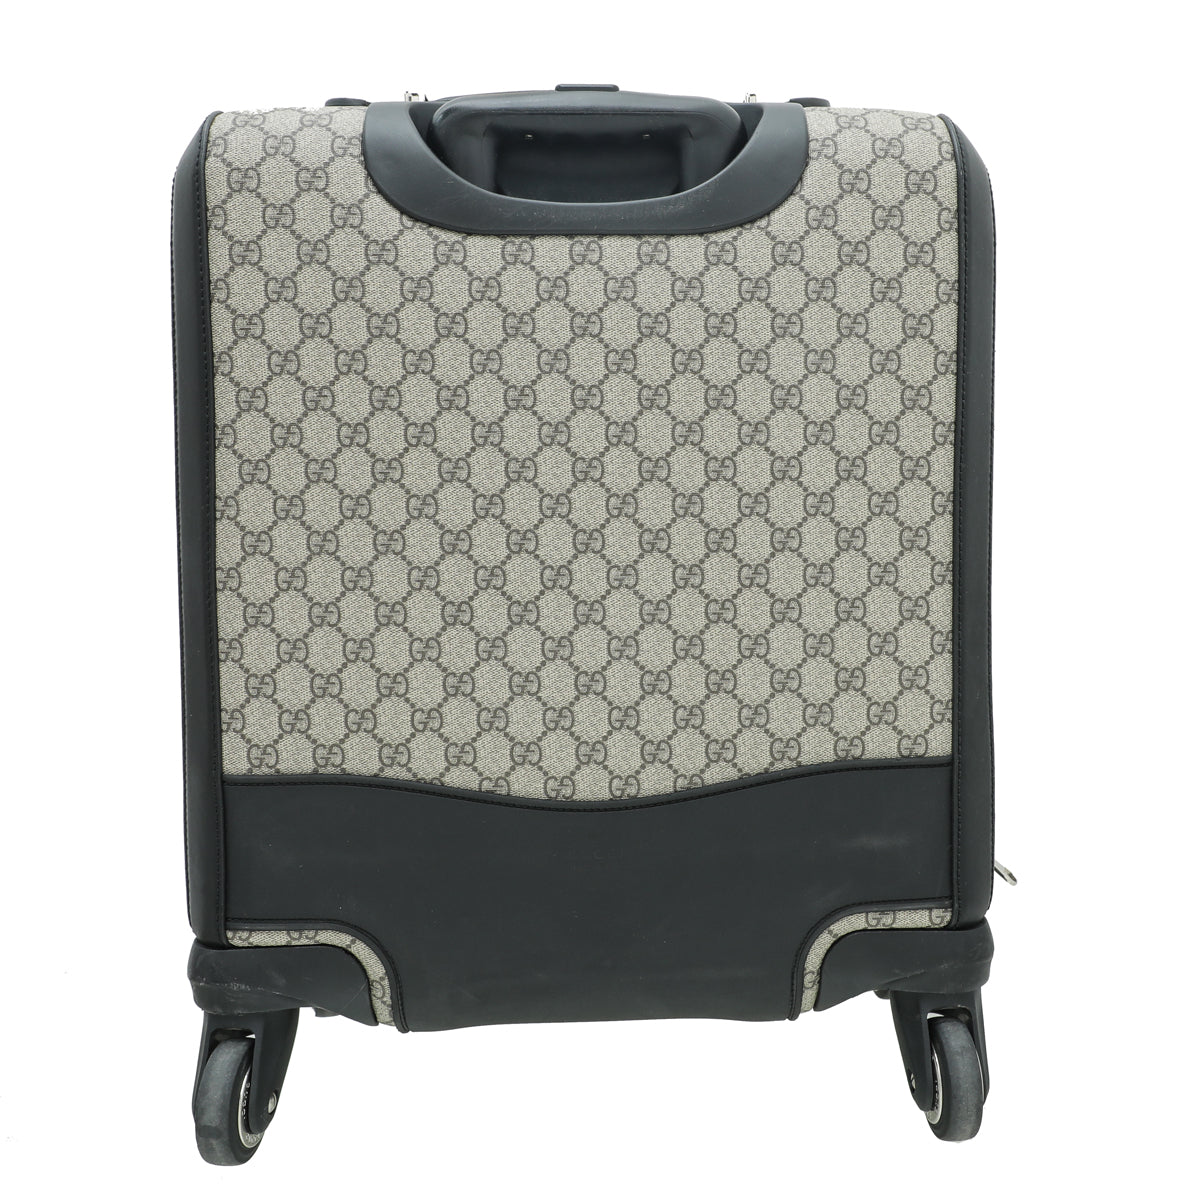 Gucci Bicolor GG Supreme Carry On Suitcase Bag